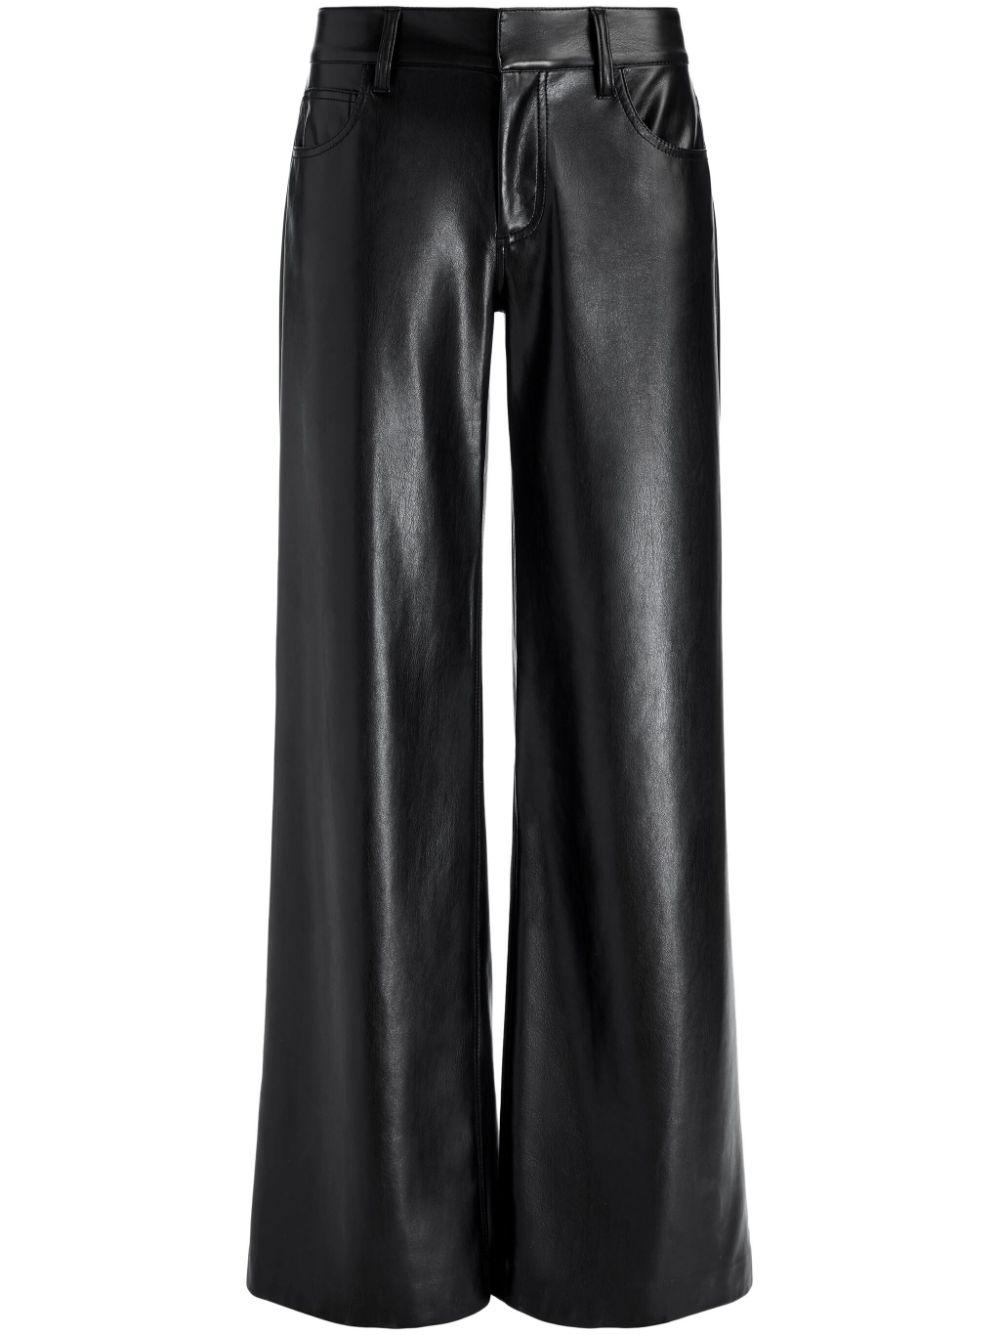 Alice + Olivia Trish Low-rise Flared Trousers in Black | Lyst